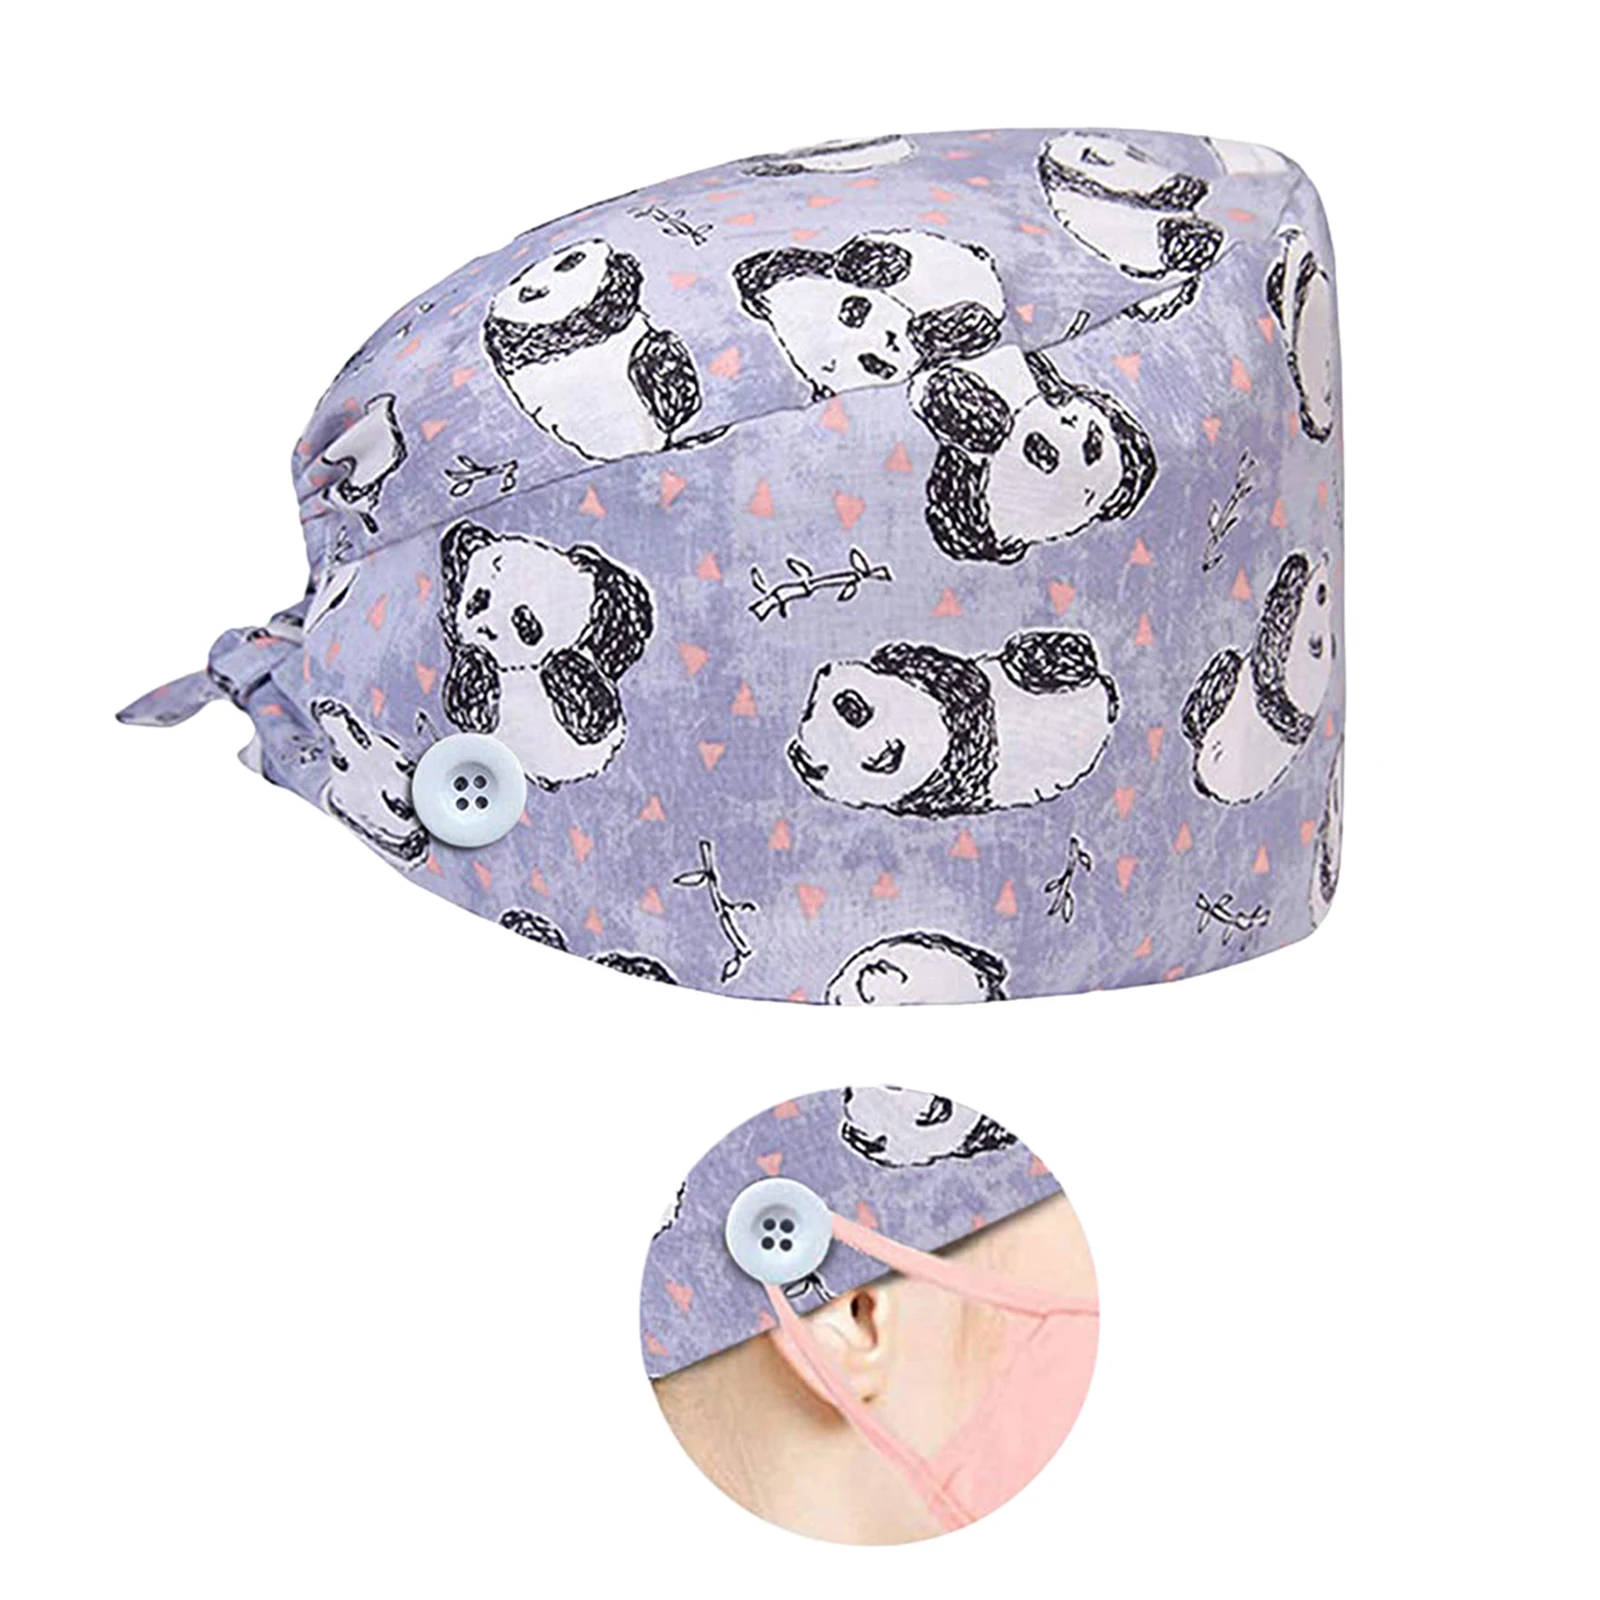 Fashion Scrub Caps with Buttons for Mask Doctor Nurses Cotton Bouffant Hats Adjustable Head Cover Wokring Hats for Women Men